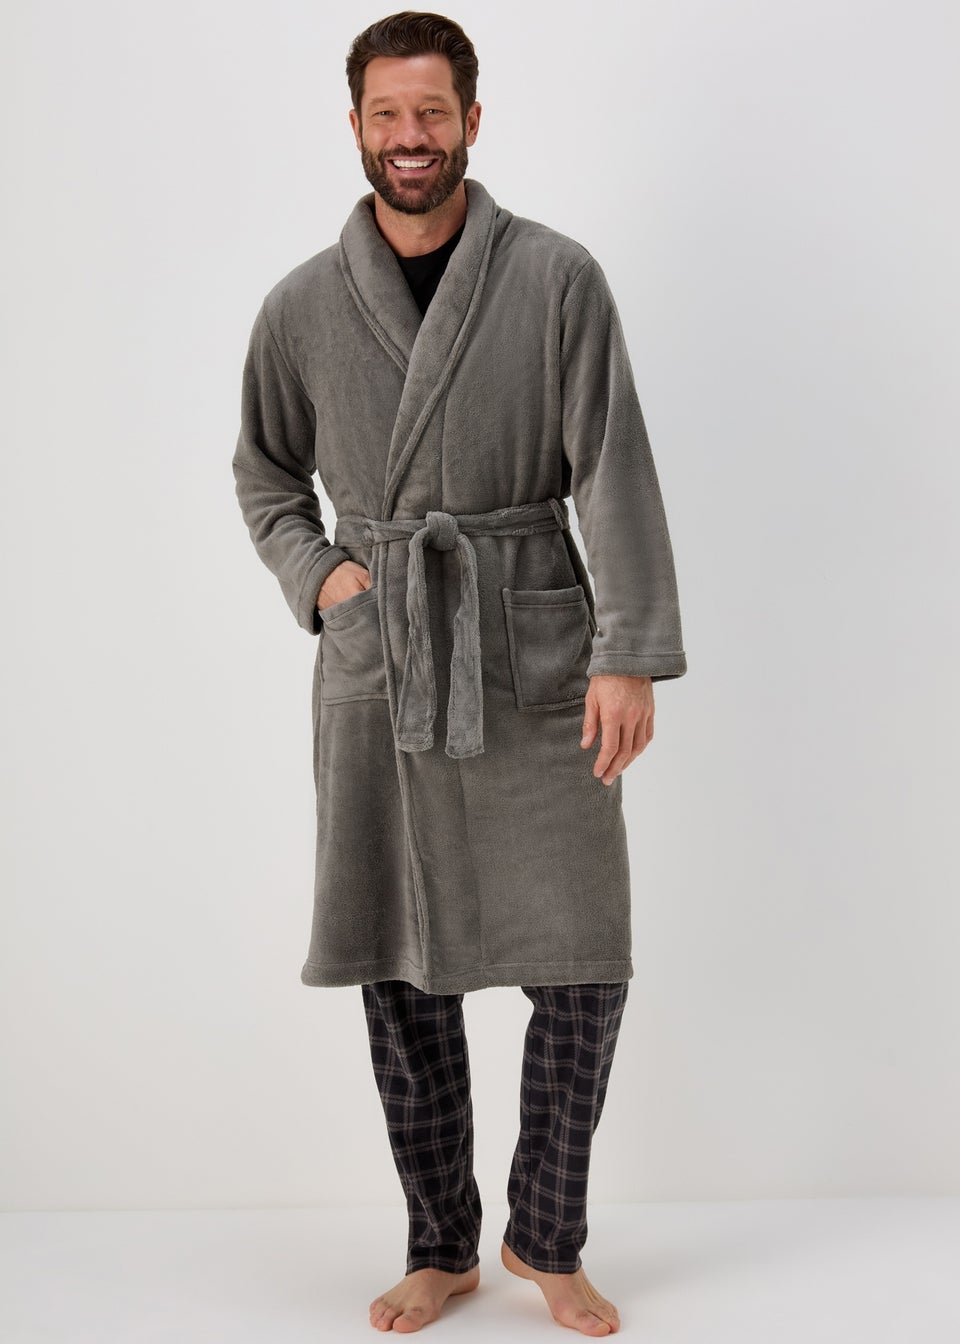 Men's Robe and Shorts Set, Lightweight Blue Cotton, Classic Pajamas, Summer  Travel Dressing Gown